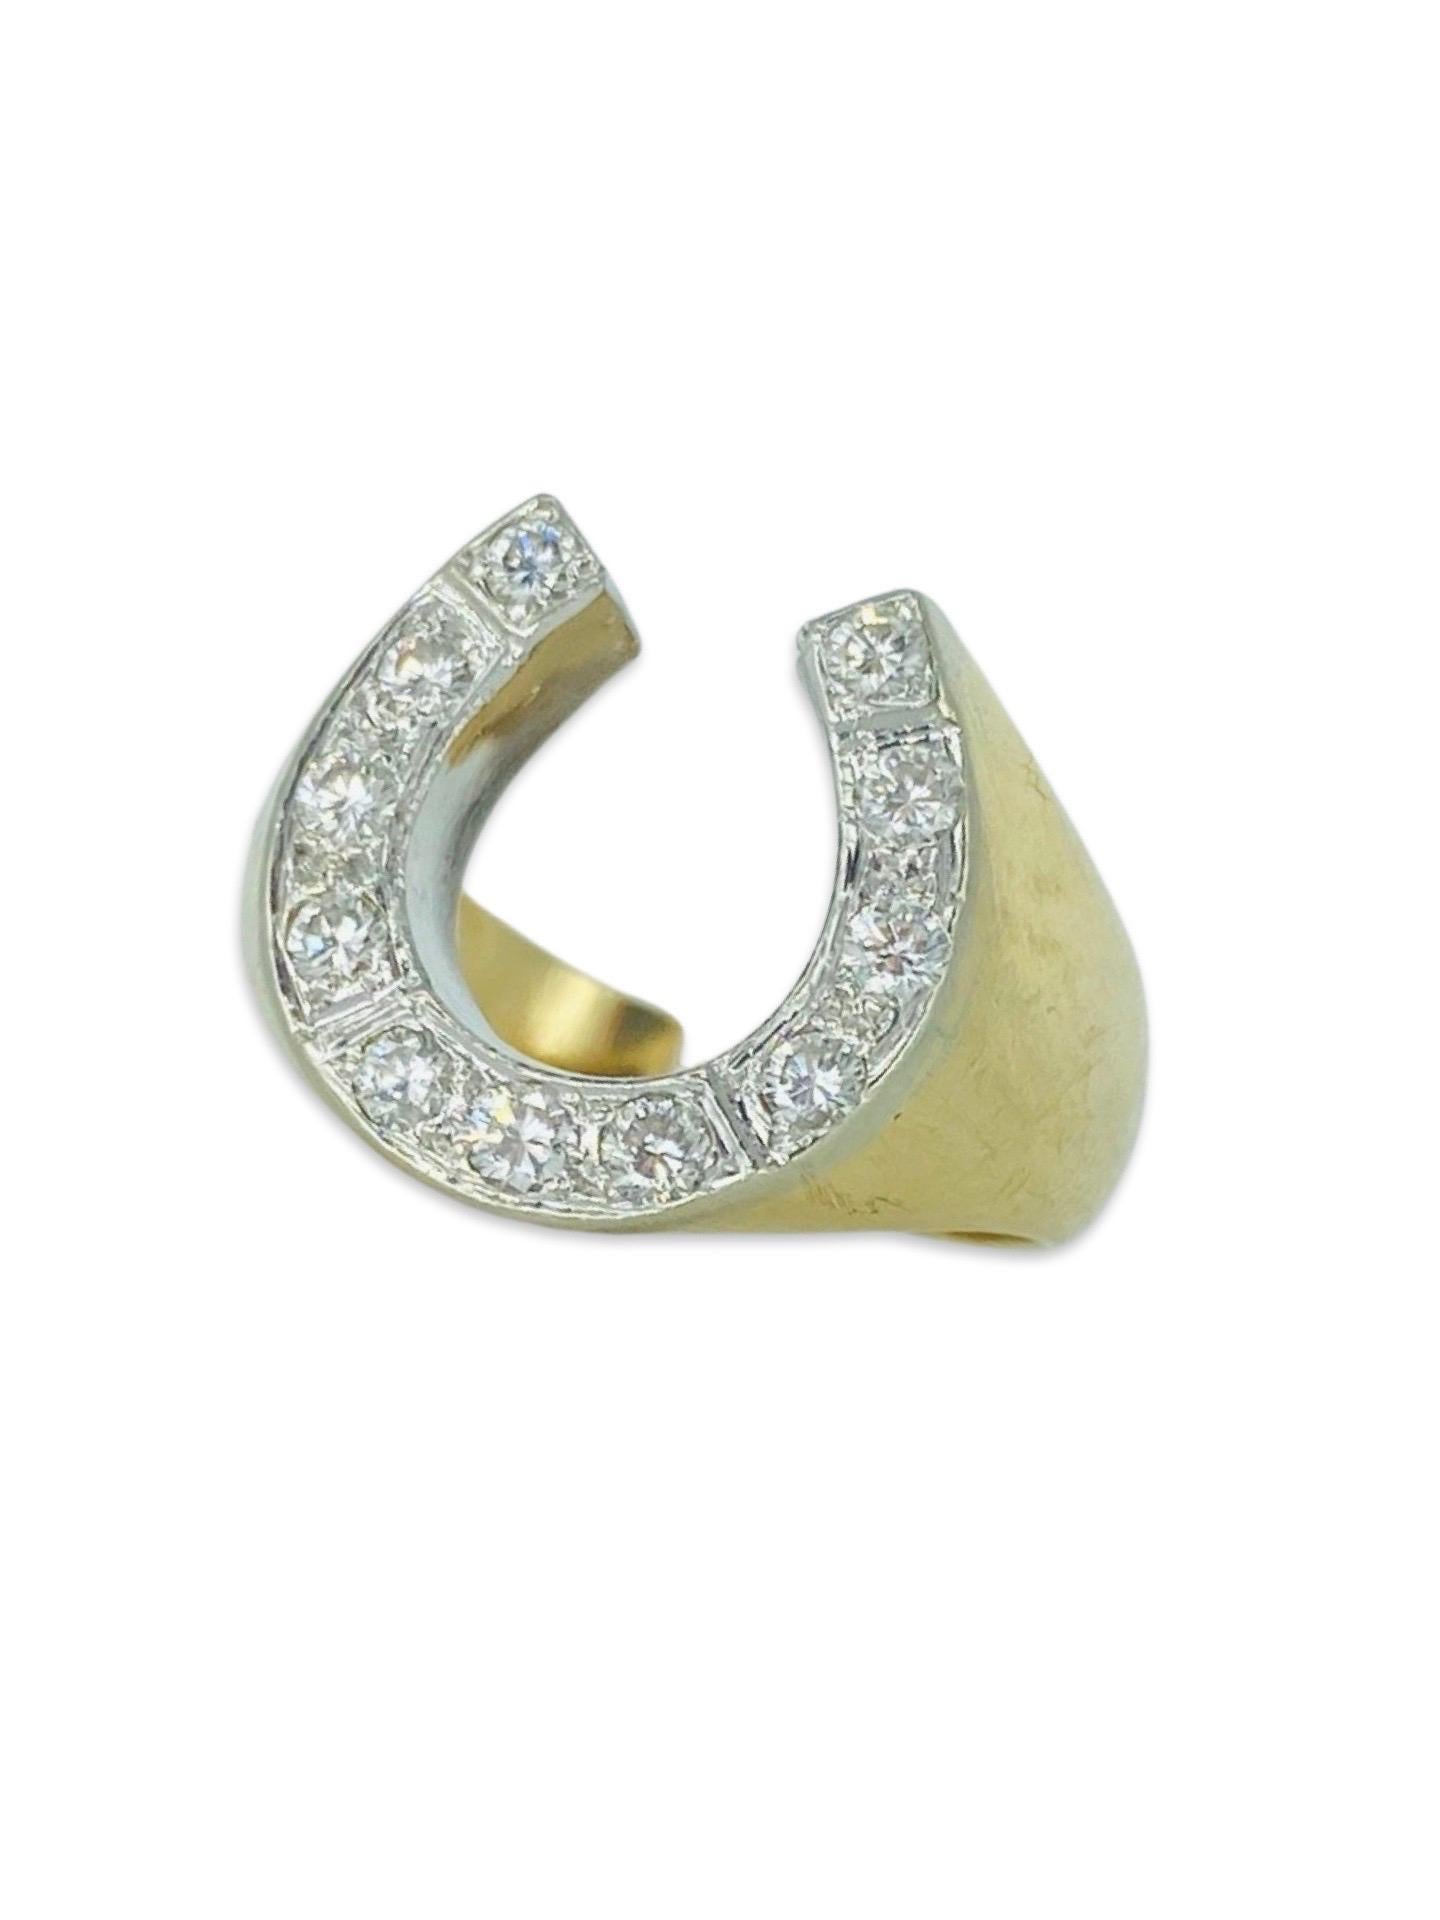 Vintage 0.66 Carat Diamonds Lucky Horseshoe Ring 14k Gold
Total diamonds: 11
Natural diamonds H/SI1
Ring Size: 9
Weights: 9.6g
Heavy high quality made ring iconic vintage 